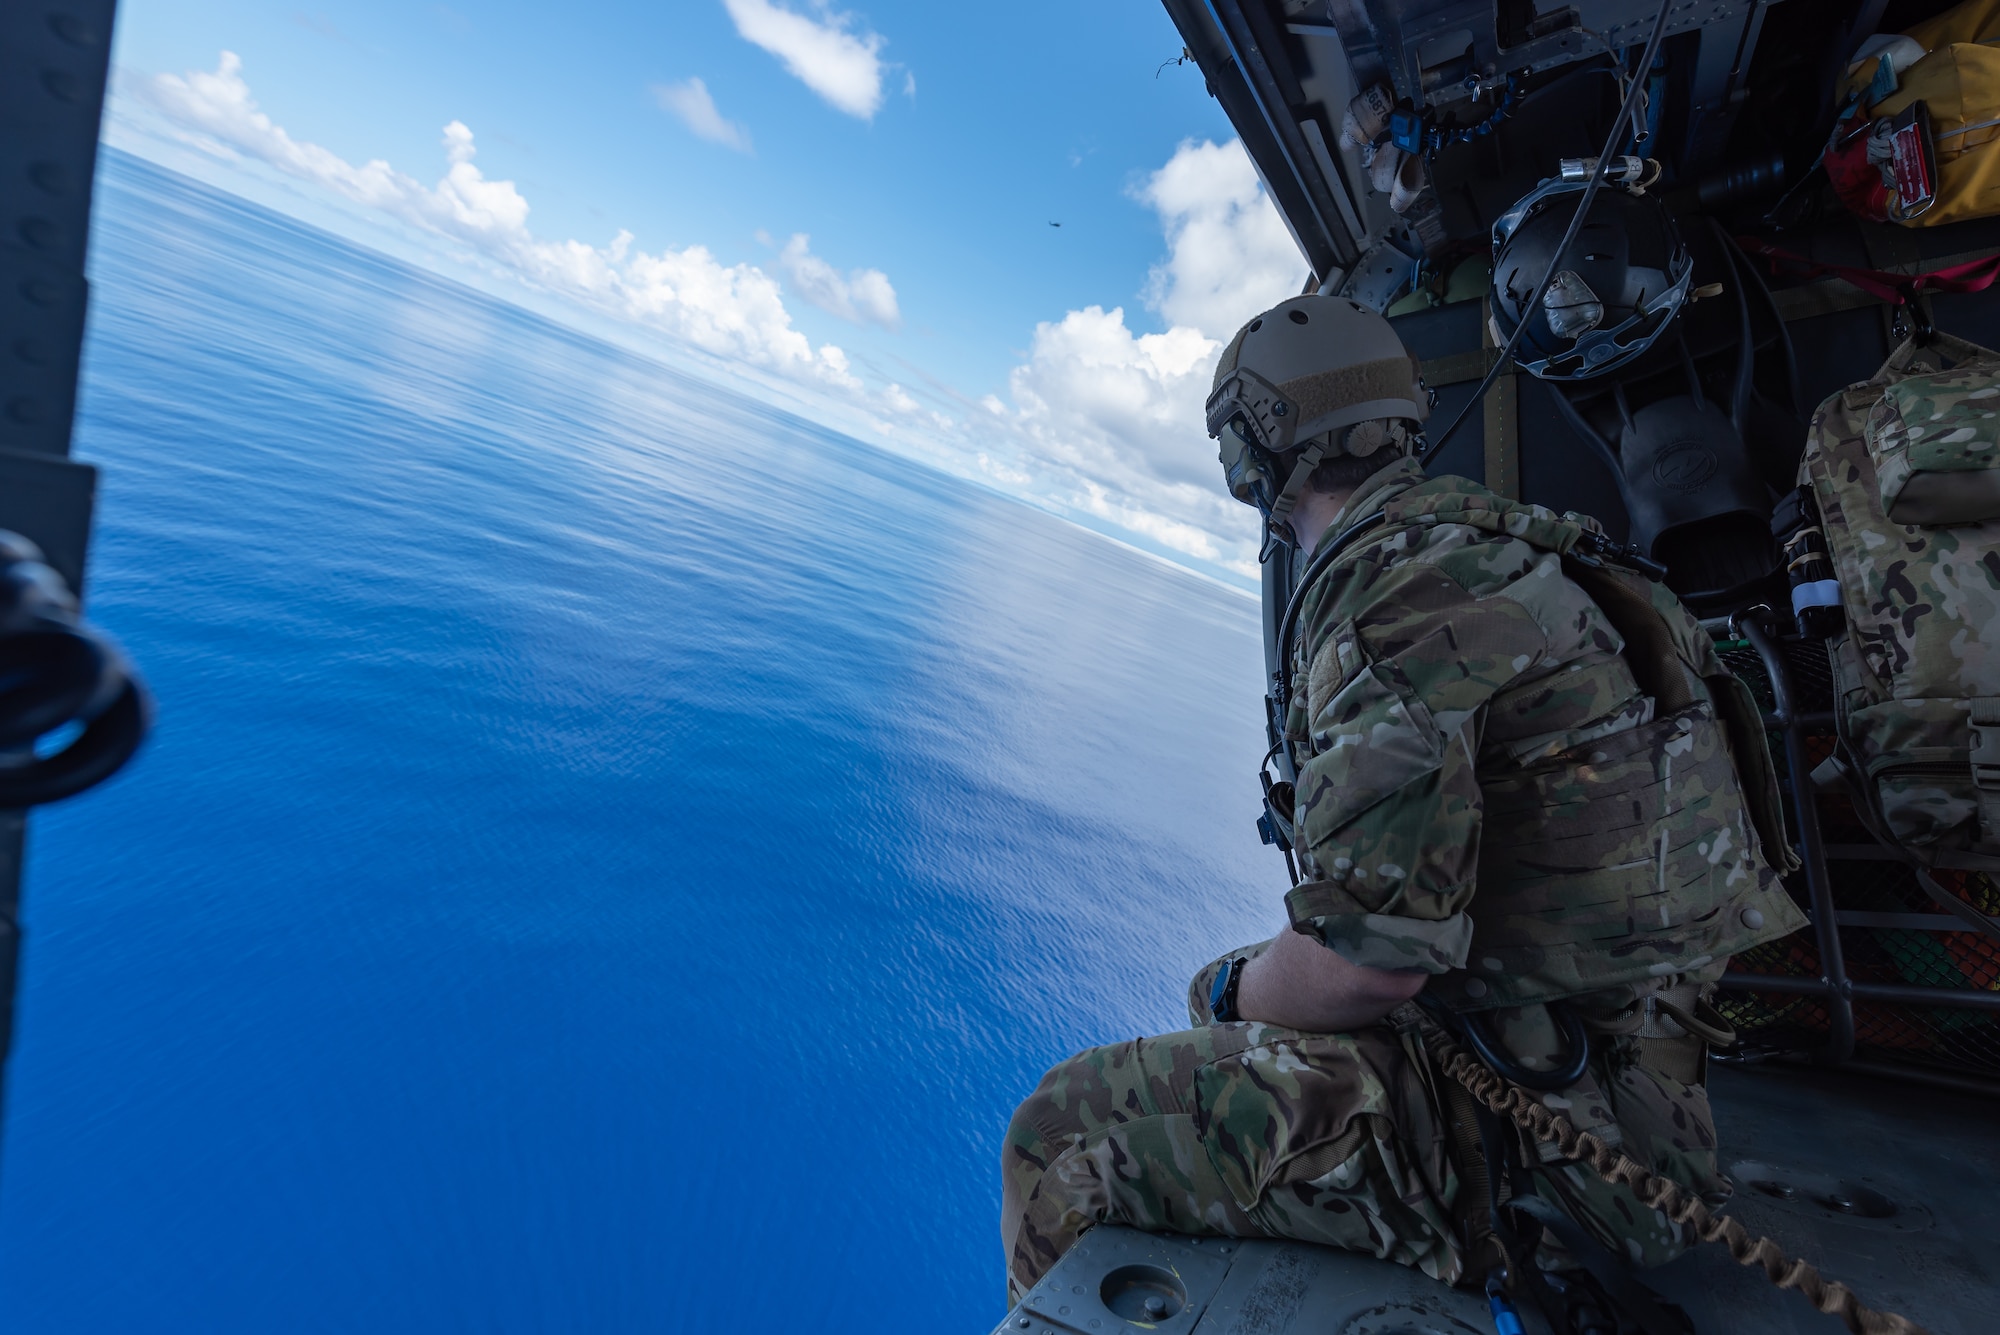 A U.S. Air Force pararescueman assigned to the 31st Rescue Squadron, looks out over the ocean while aboard an HH-60G Pave Hawk, July 26, 2019, out of Kadena Air Base, Japan. The 31st RQS consists of combat rescue officers, pararescue specialists and survival, evasion, resistance and escape specialists who work together to facilitate the return of isolated personnel back to friendly forces. (U.S. Air Force photo by Airman 1st Class Matthew Seefeldt)